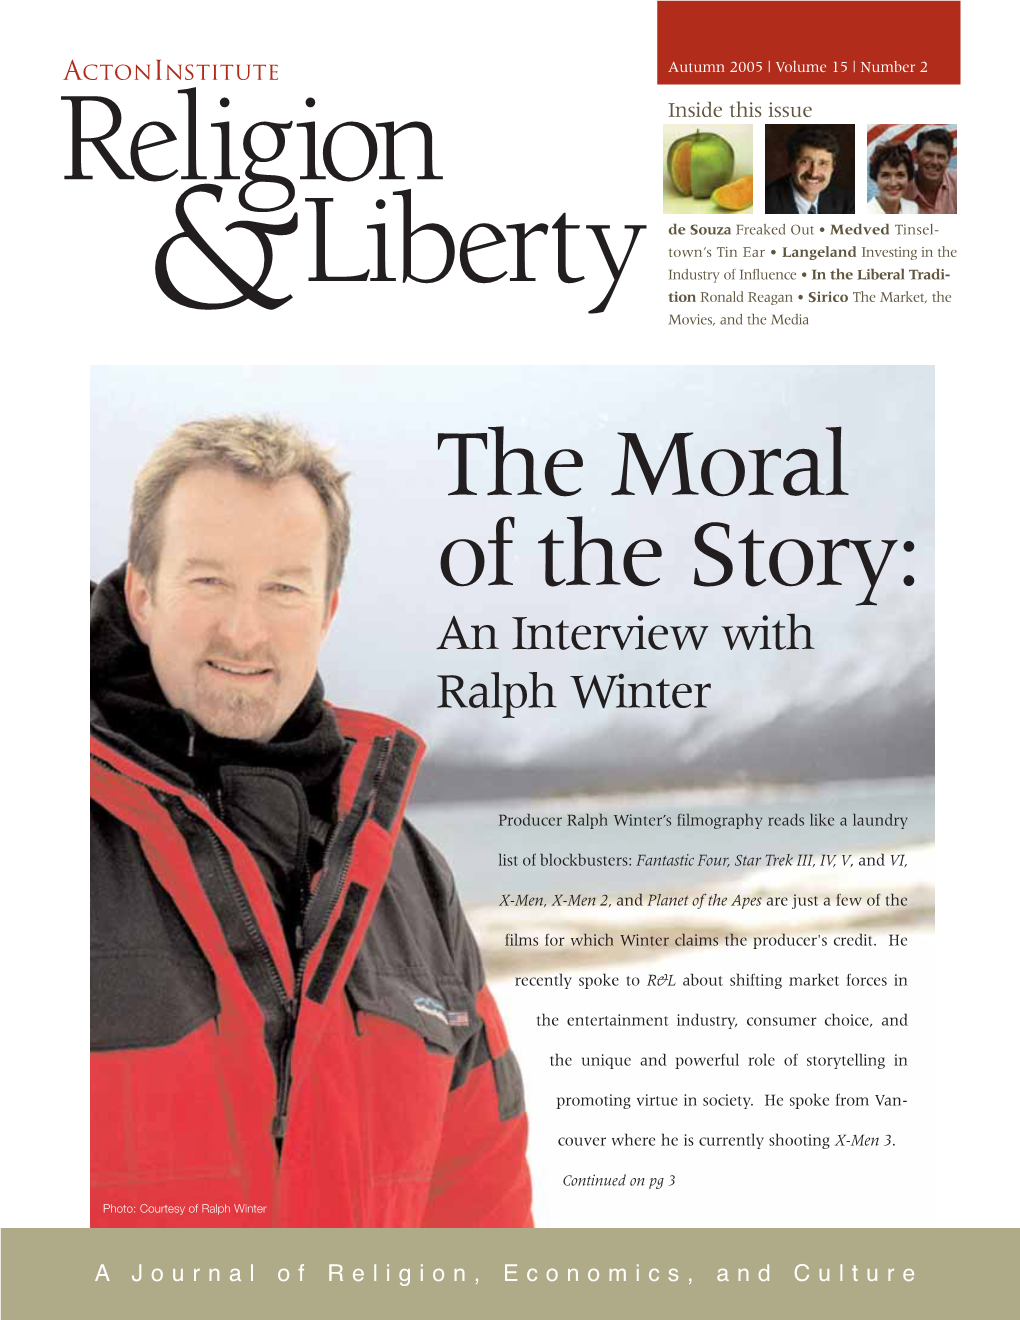 The Moral of the Story: an Interview with Ralph Winter